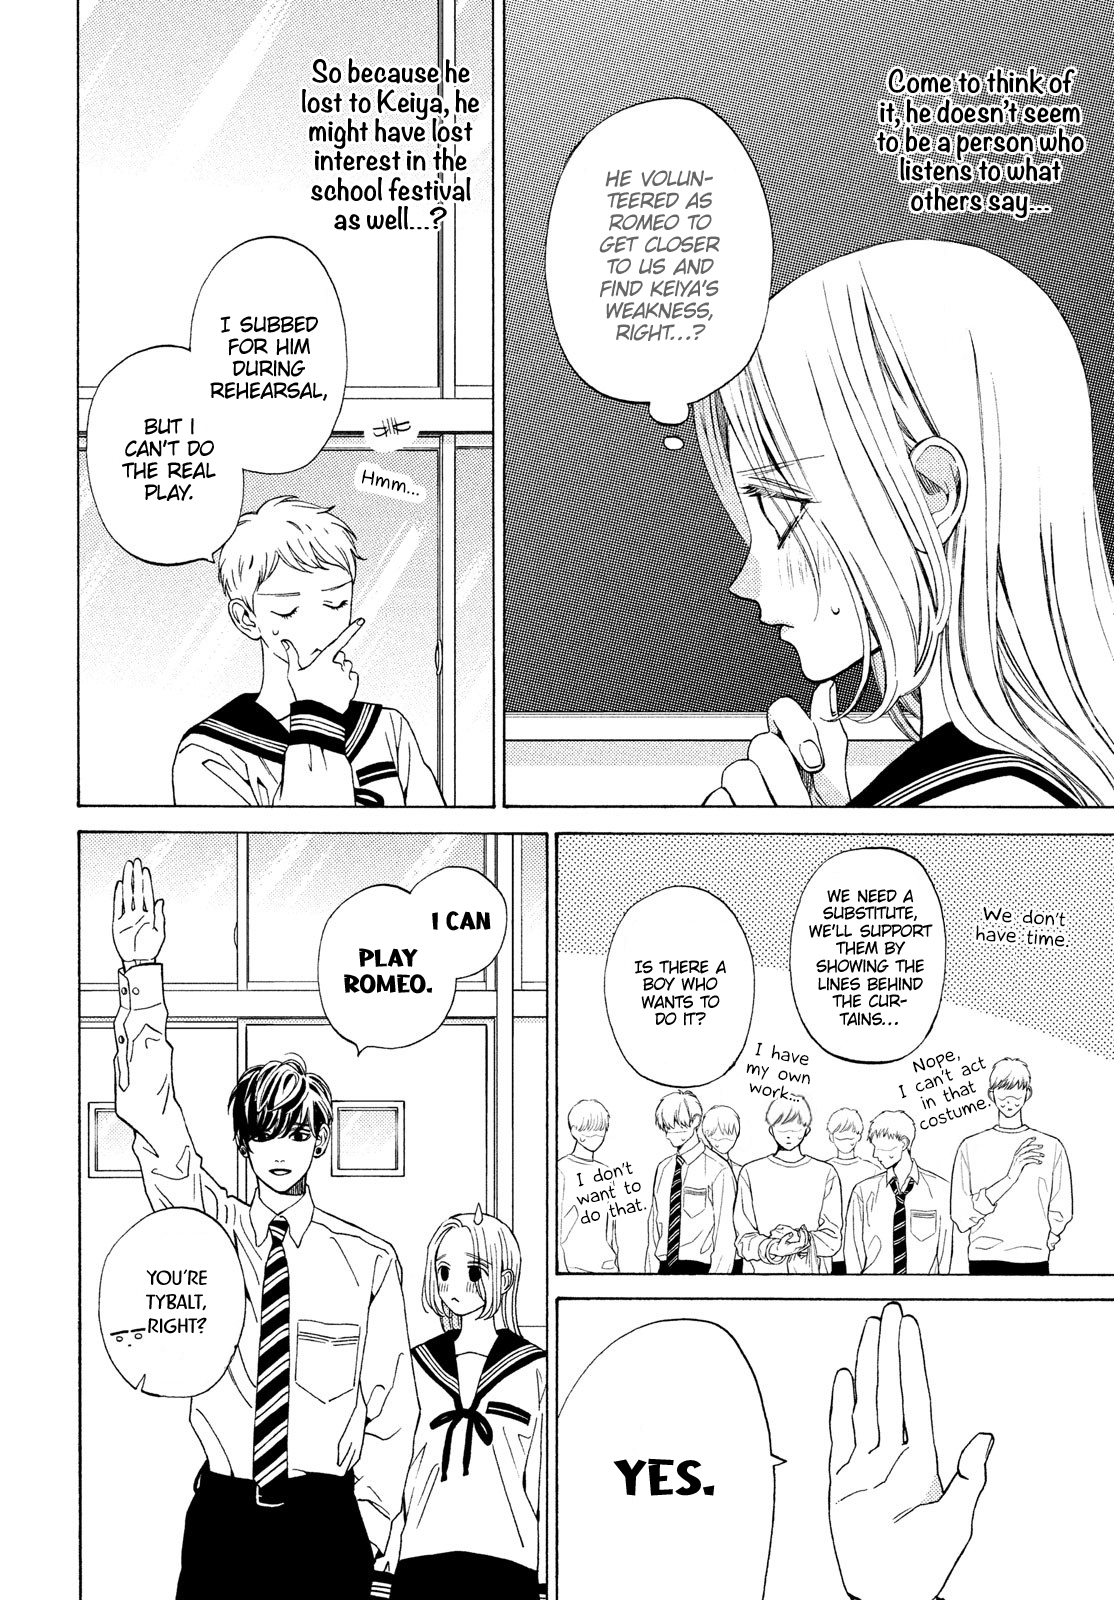 Ojou to Banken-kun Vol.5 Chapter 19: The Curtain Rises